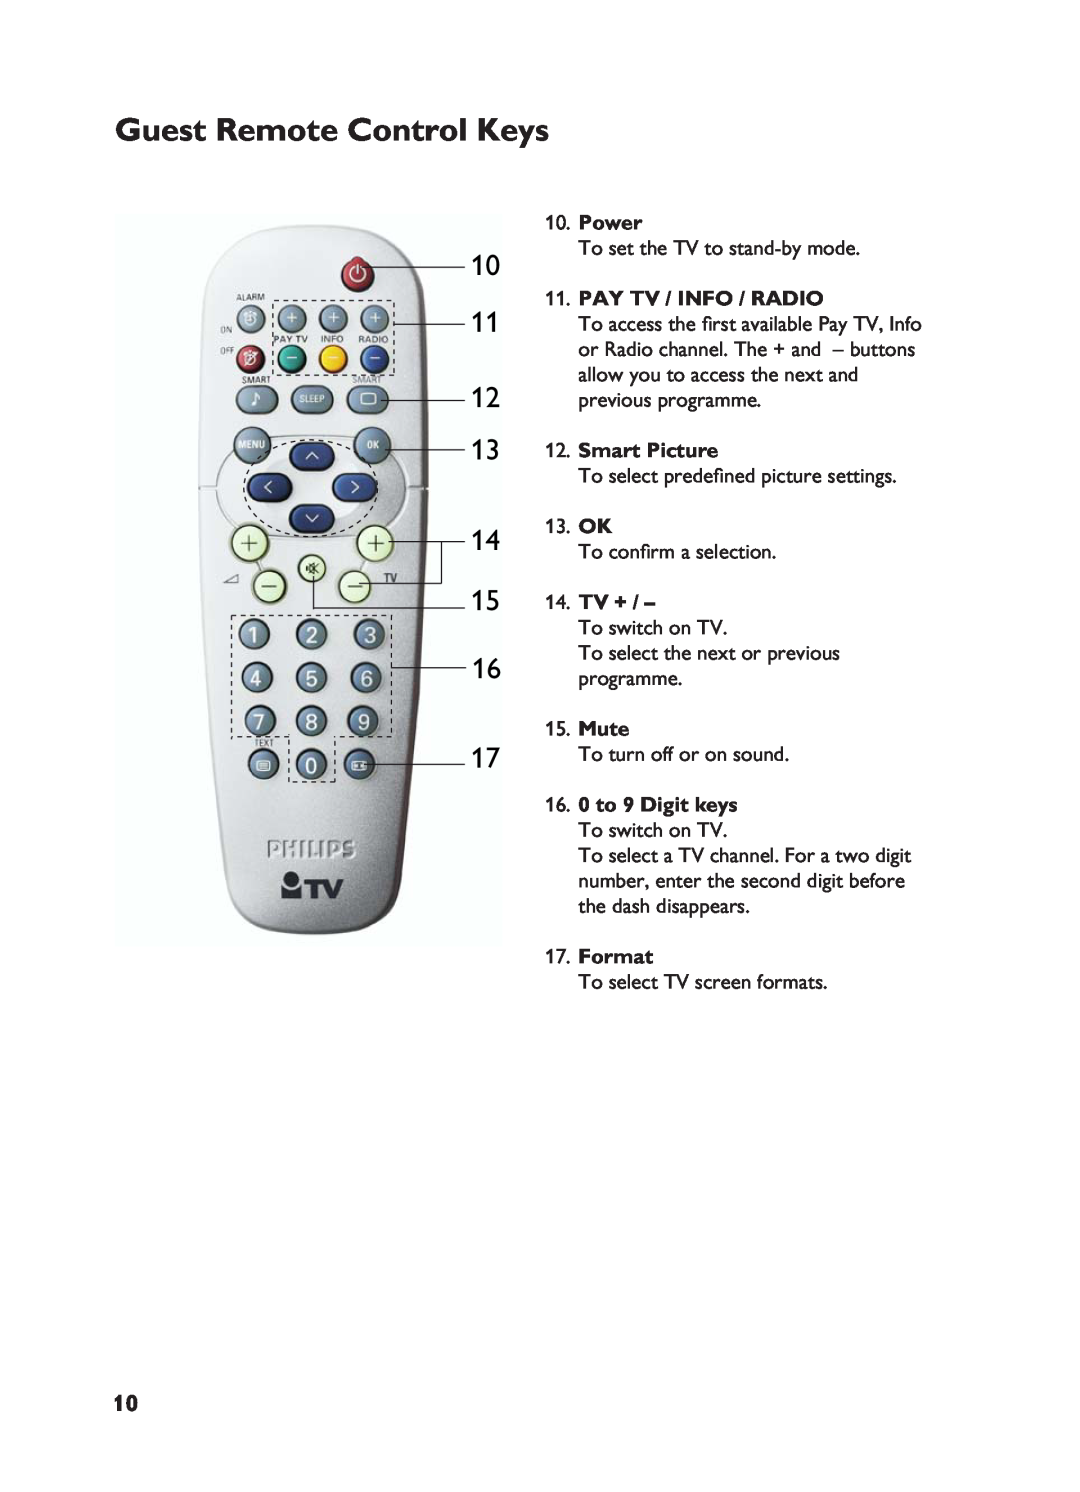 Philips 32HF7875 Pay Tv / Info / Radio, Smart Picture, Tv +, Mute, 0 to 9 Digit keys, Format, Guest Remote Control Keys 